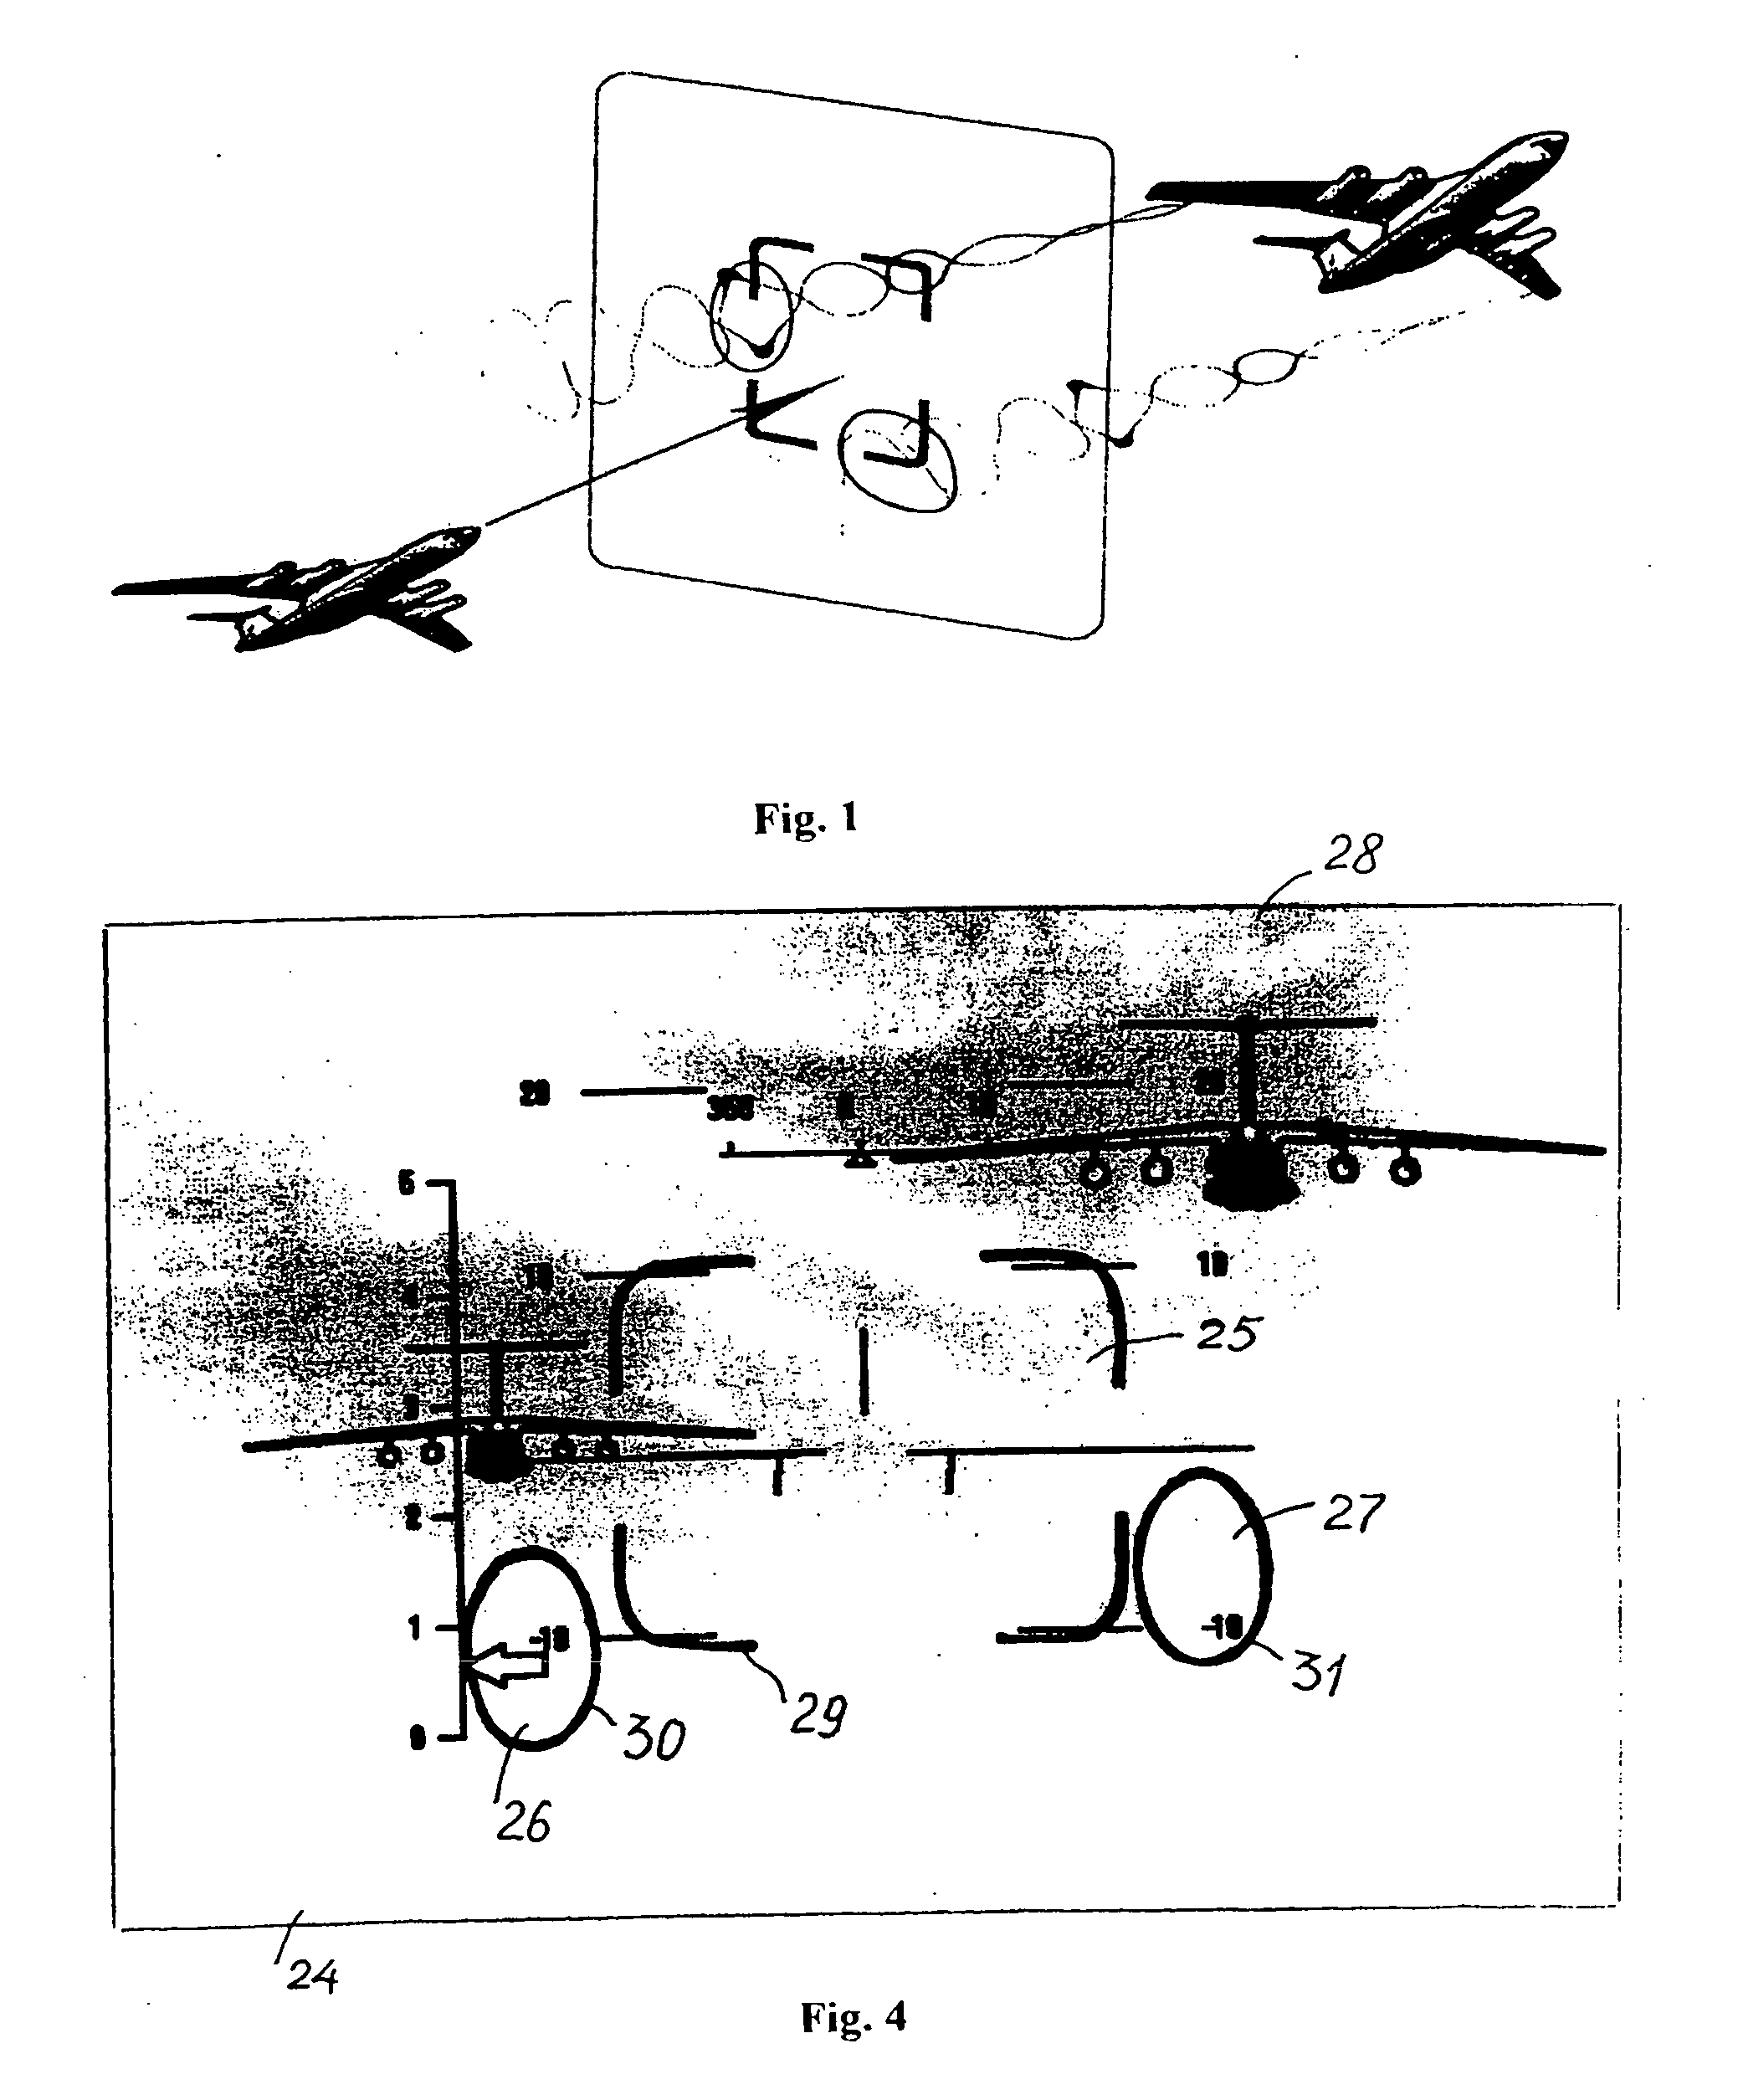 Method and system for preventing an aircraft from penetrating into a dangerous trailing vortex area of a vortex generator